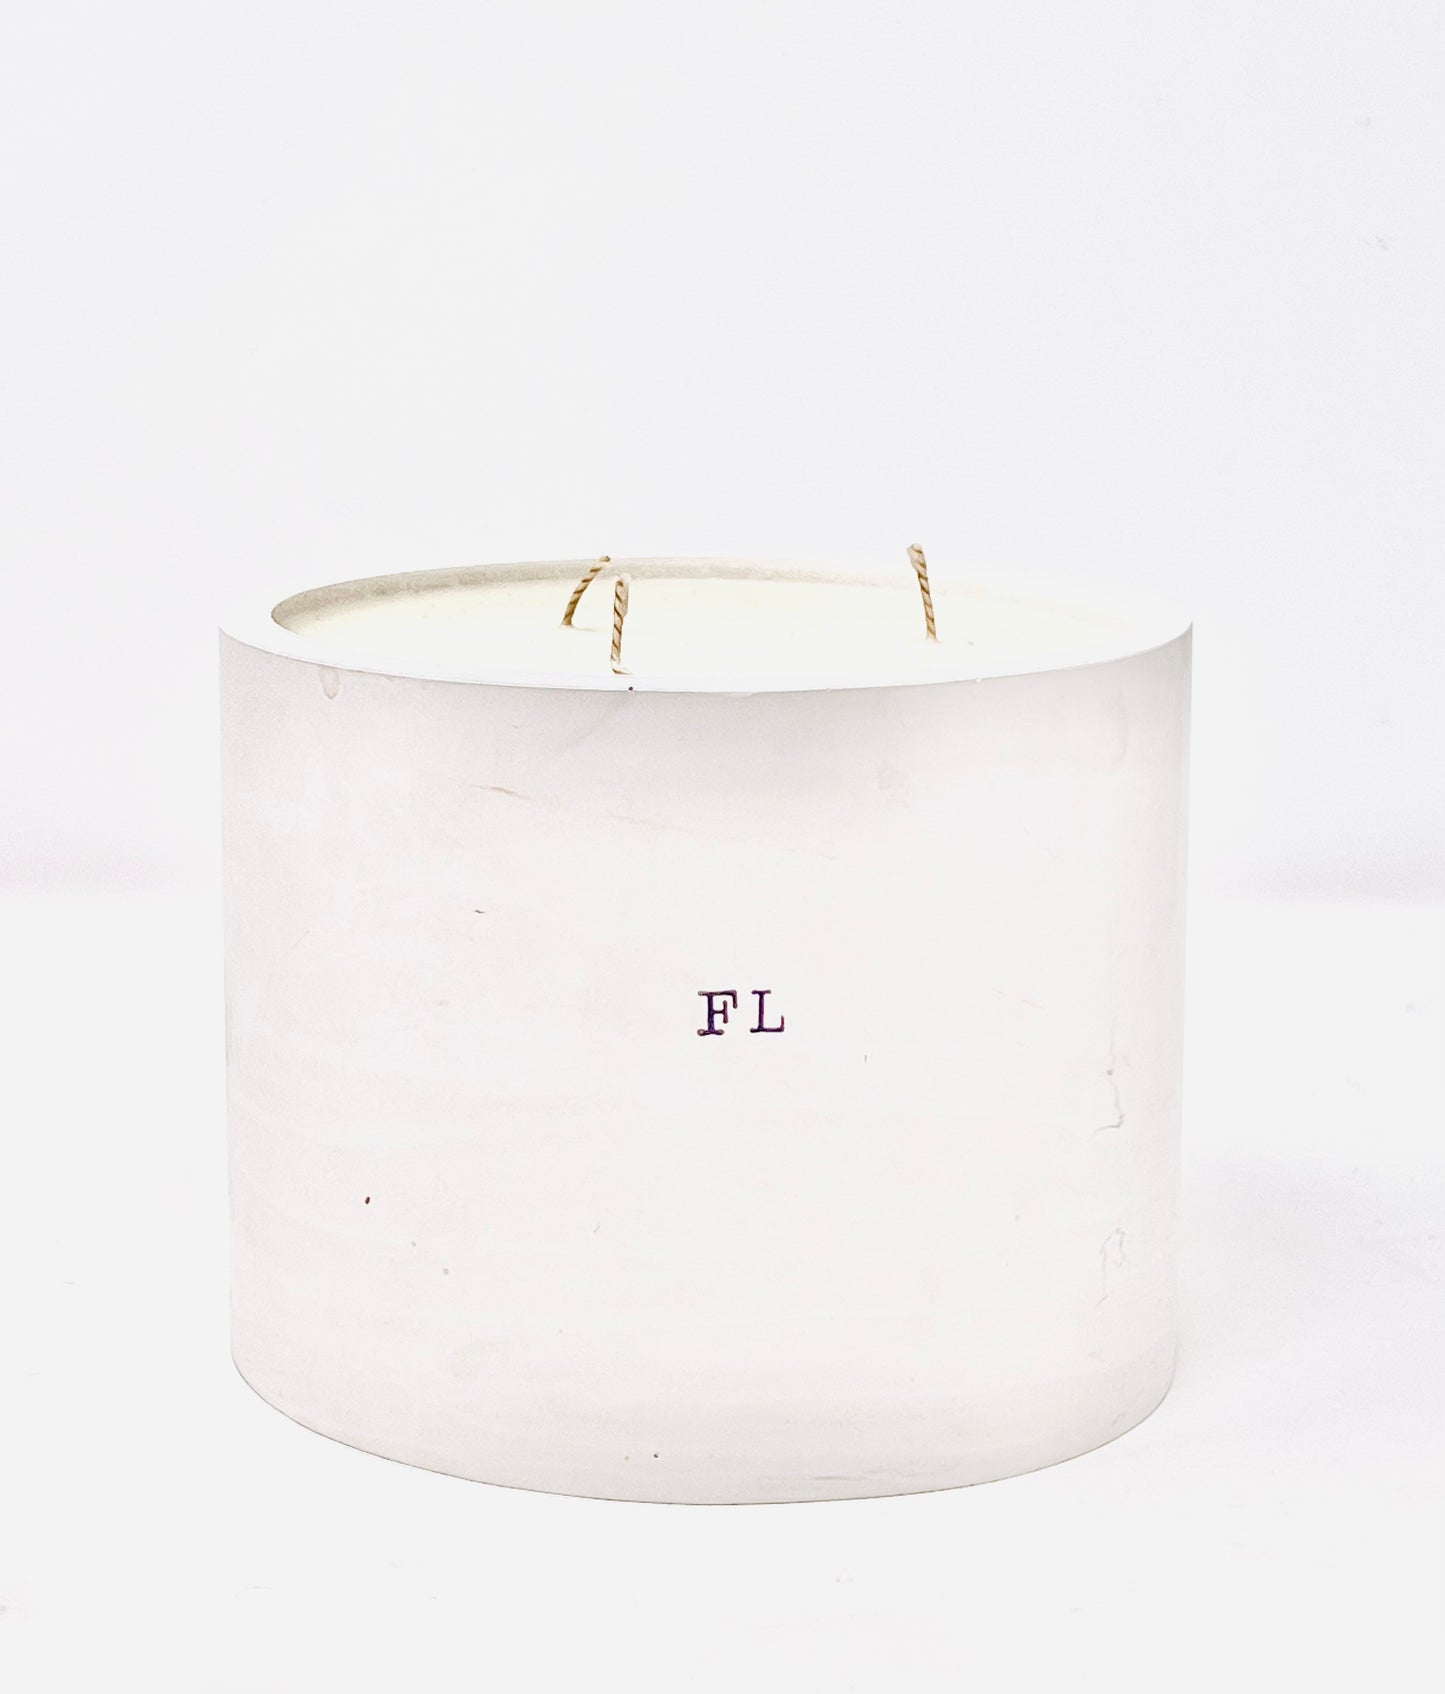 Big Sur Soy Candle, Slow Burn Candle